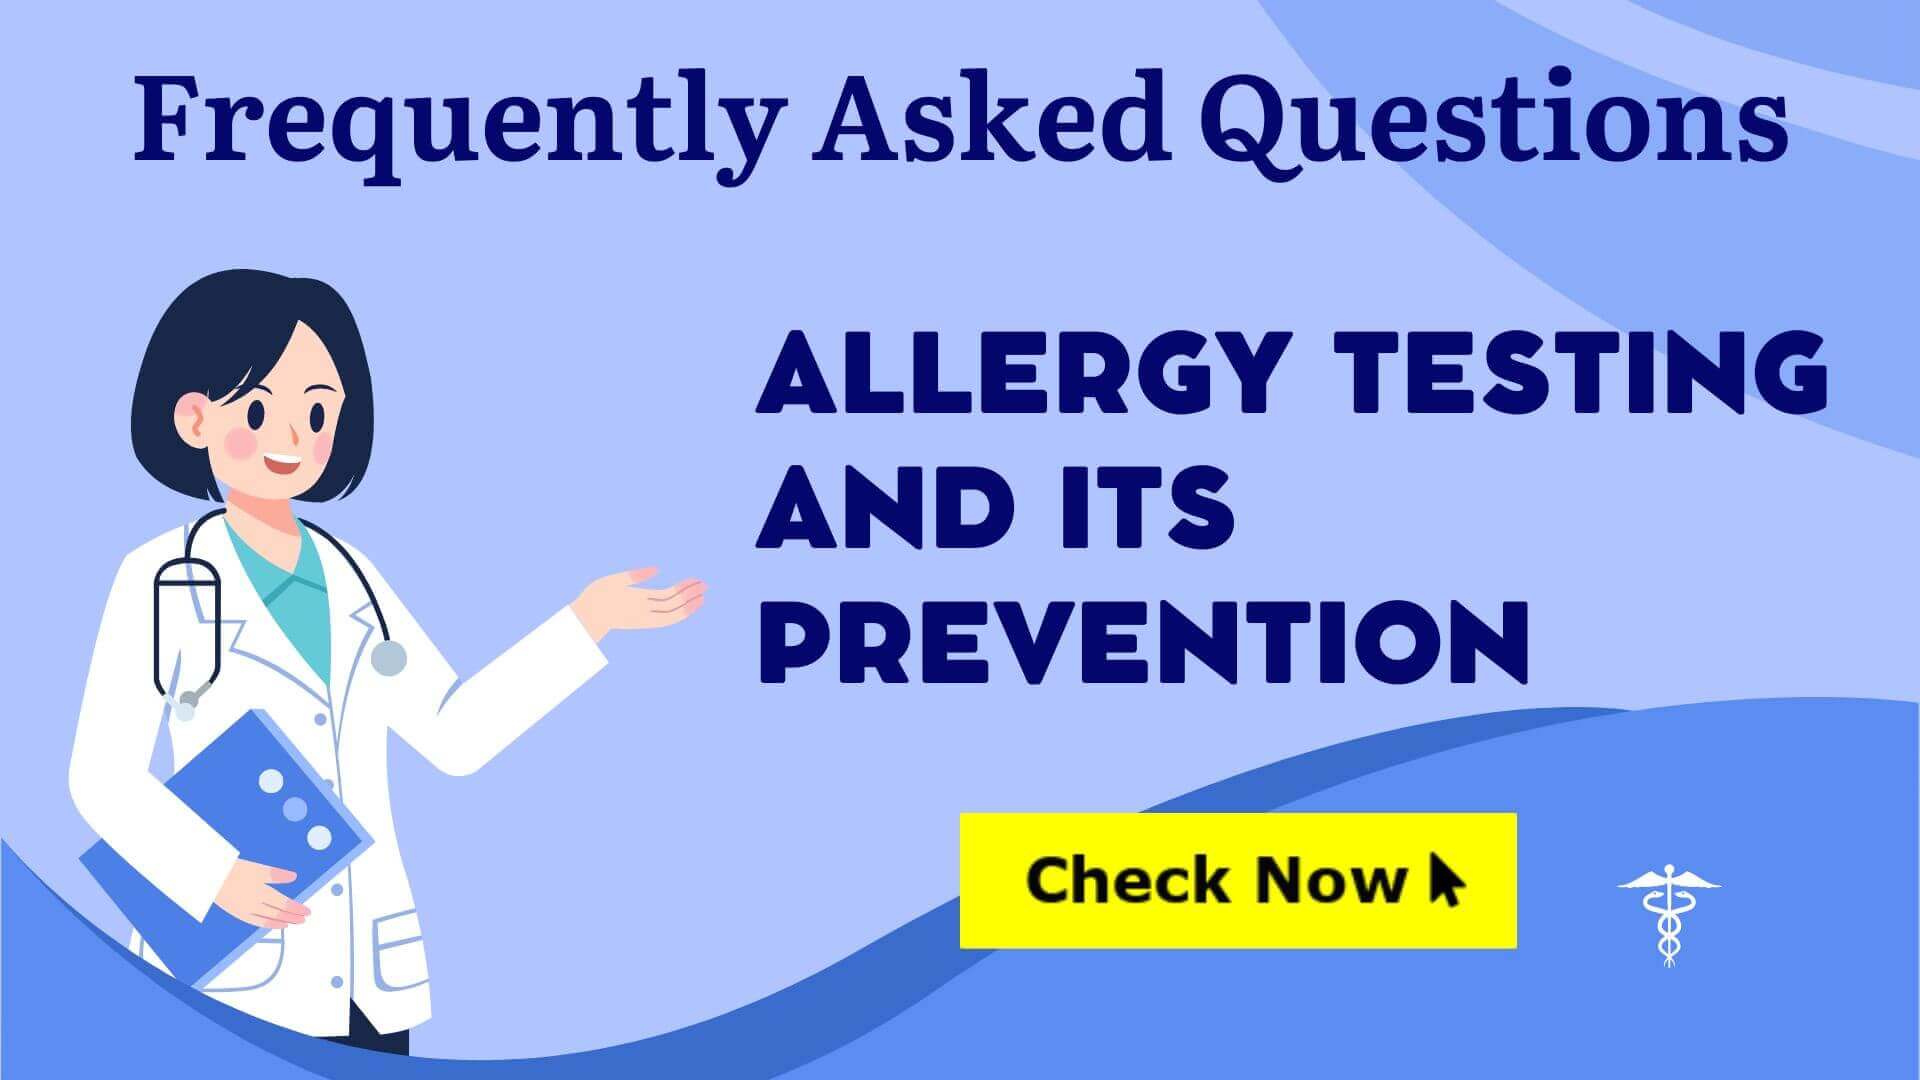 Frequently Asked Questions about Allergy testing and its preventions